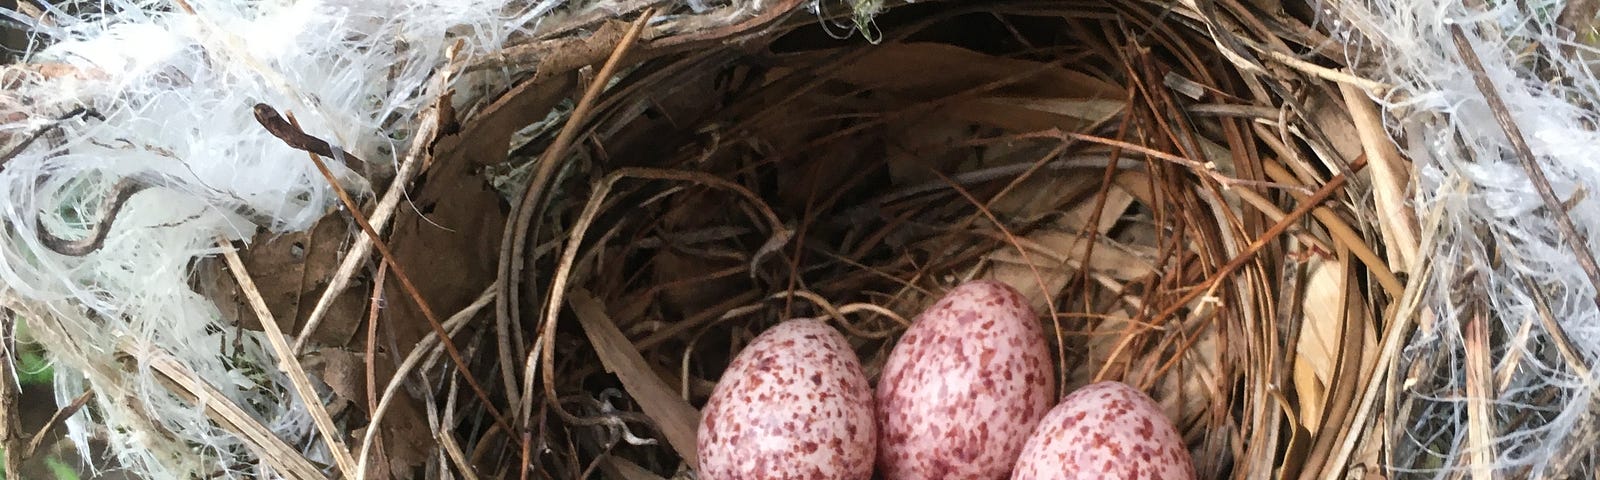 Four eggs in a nest.